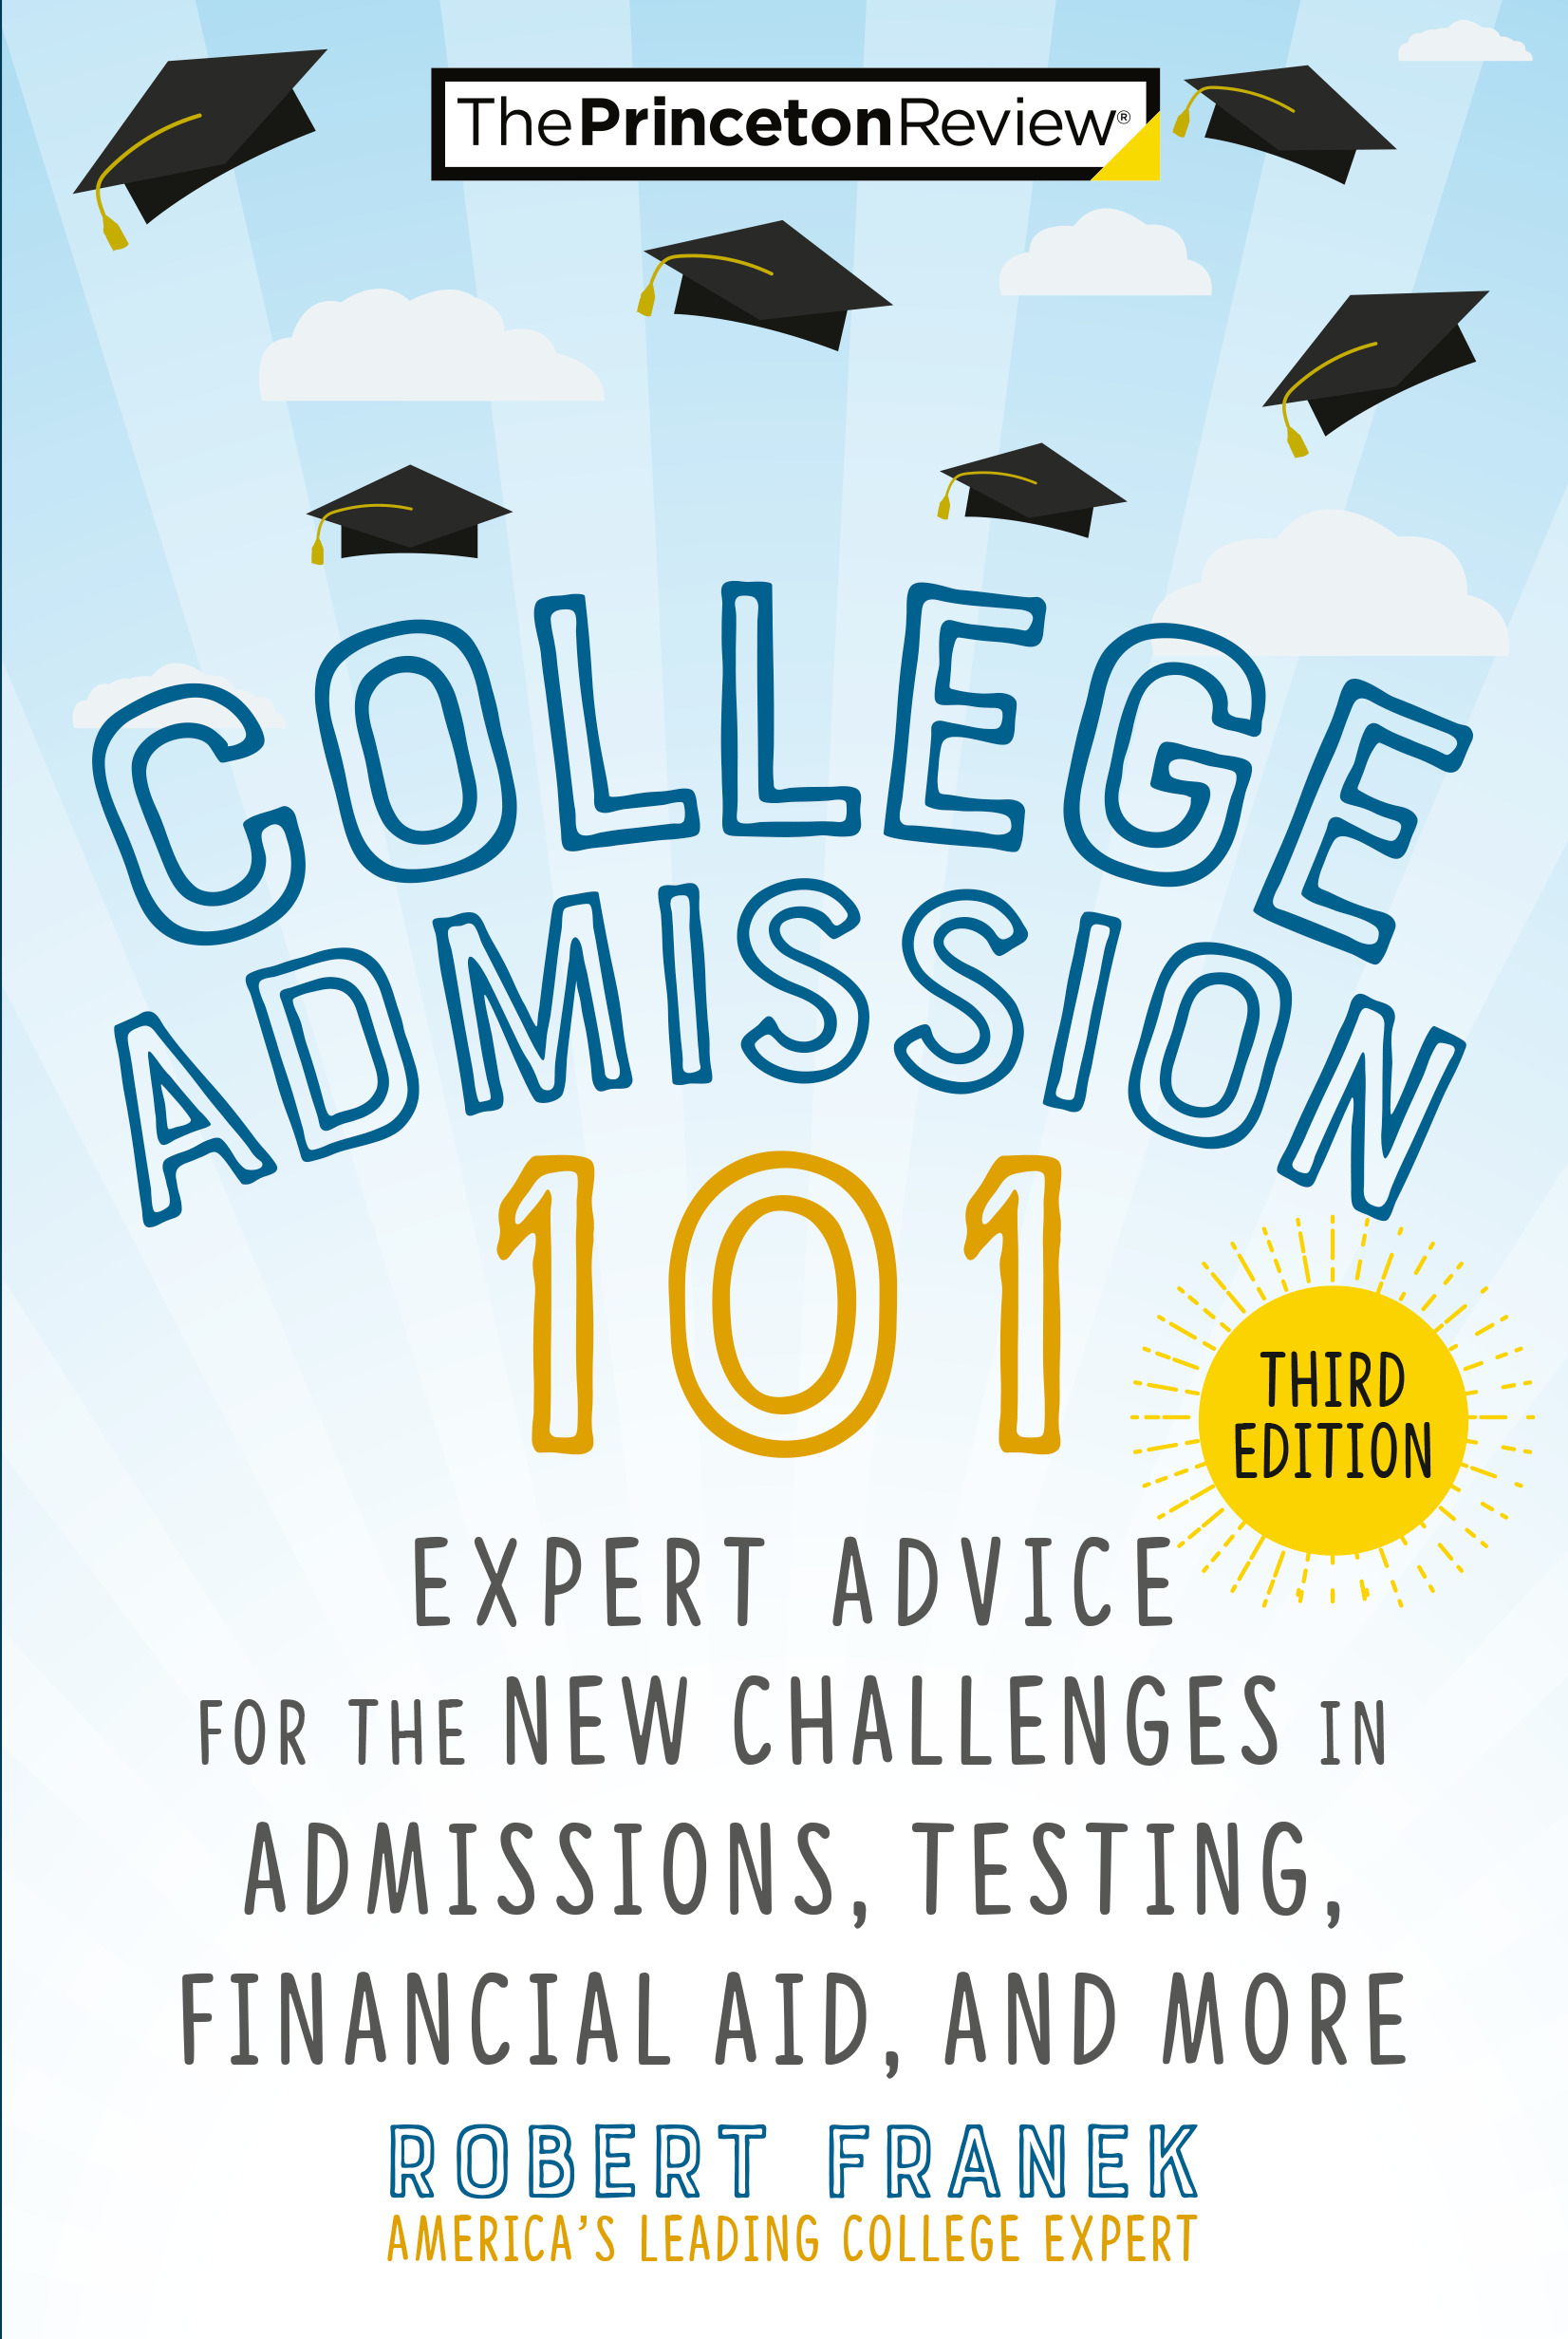 College Admission 101, 3rd Edition : Expert Advice for the New Challenges in Admissions, Testing, Financial Aid, and More | The Princeton Review